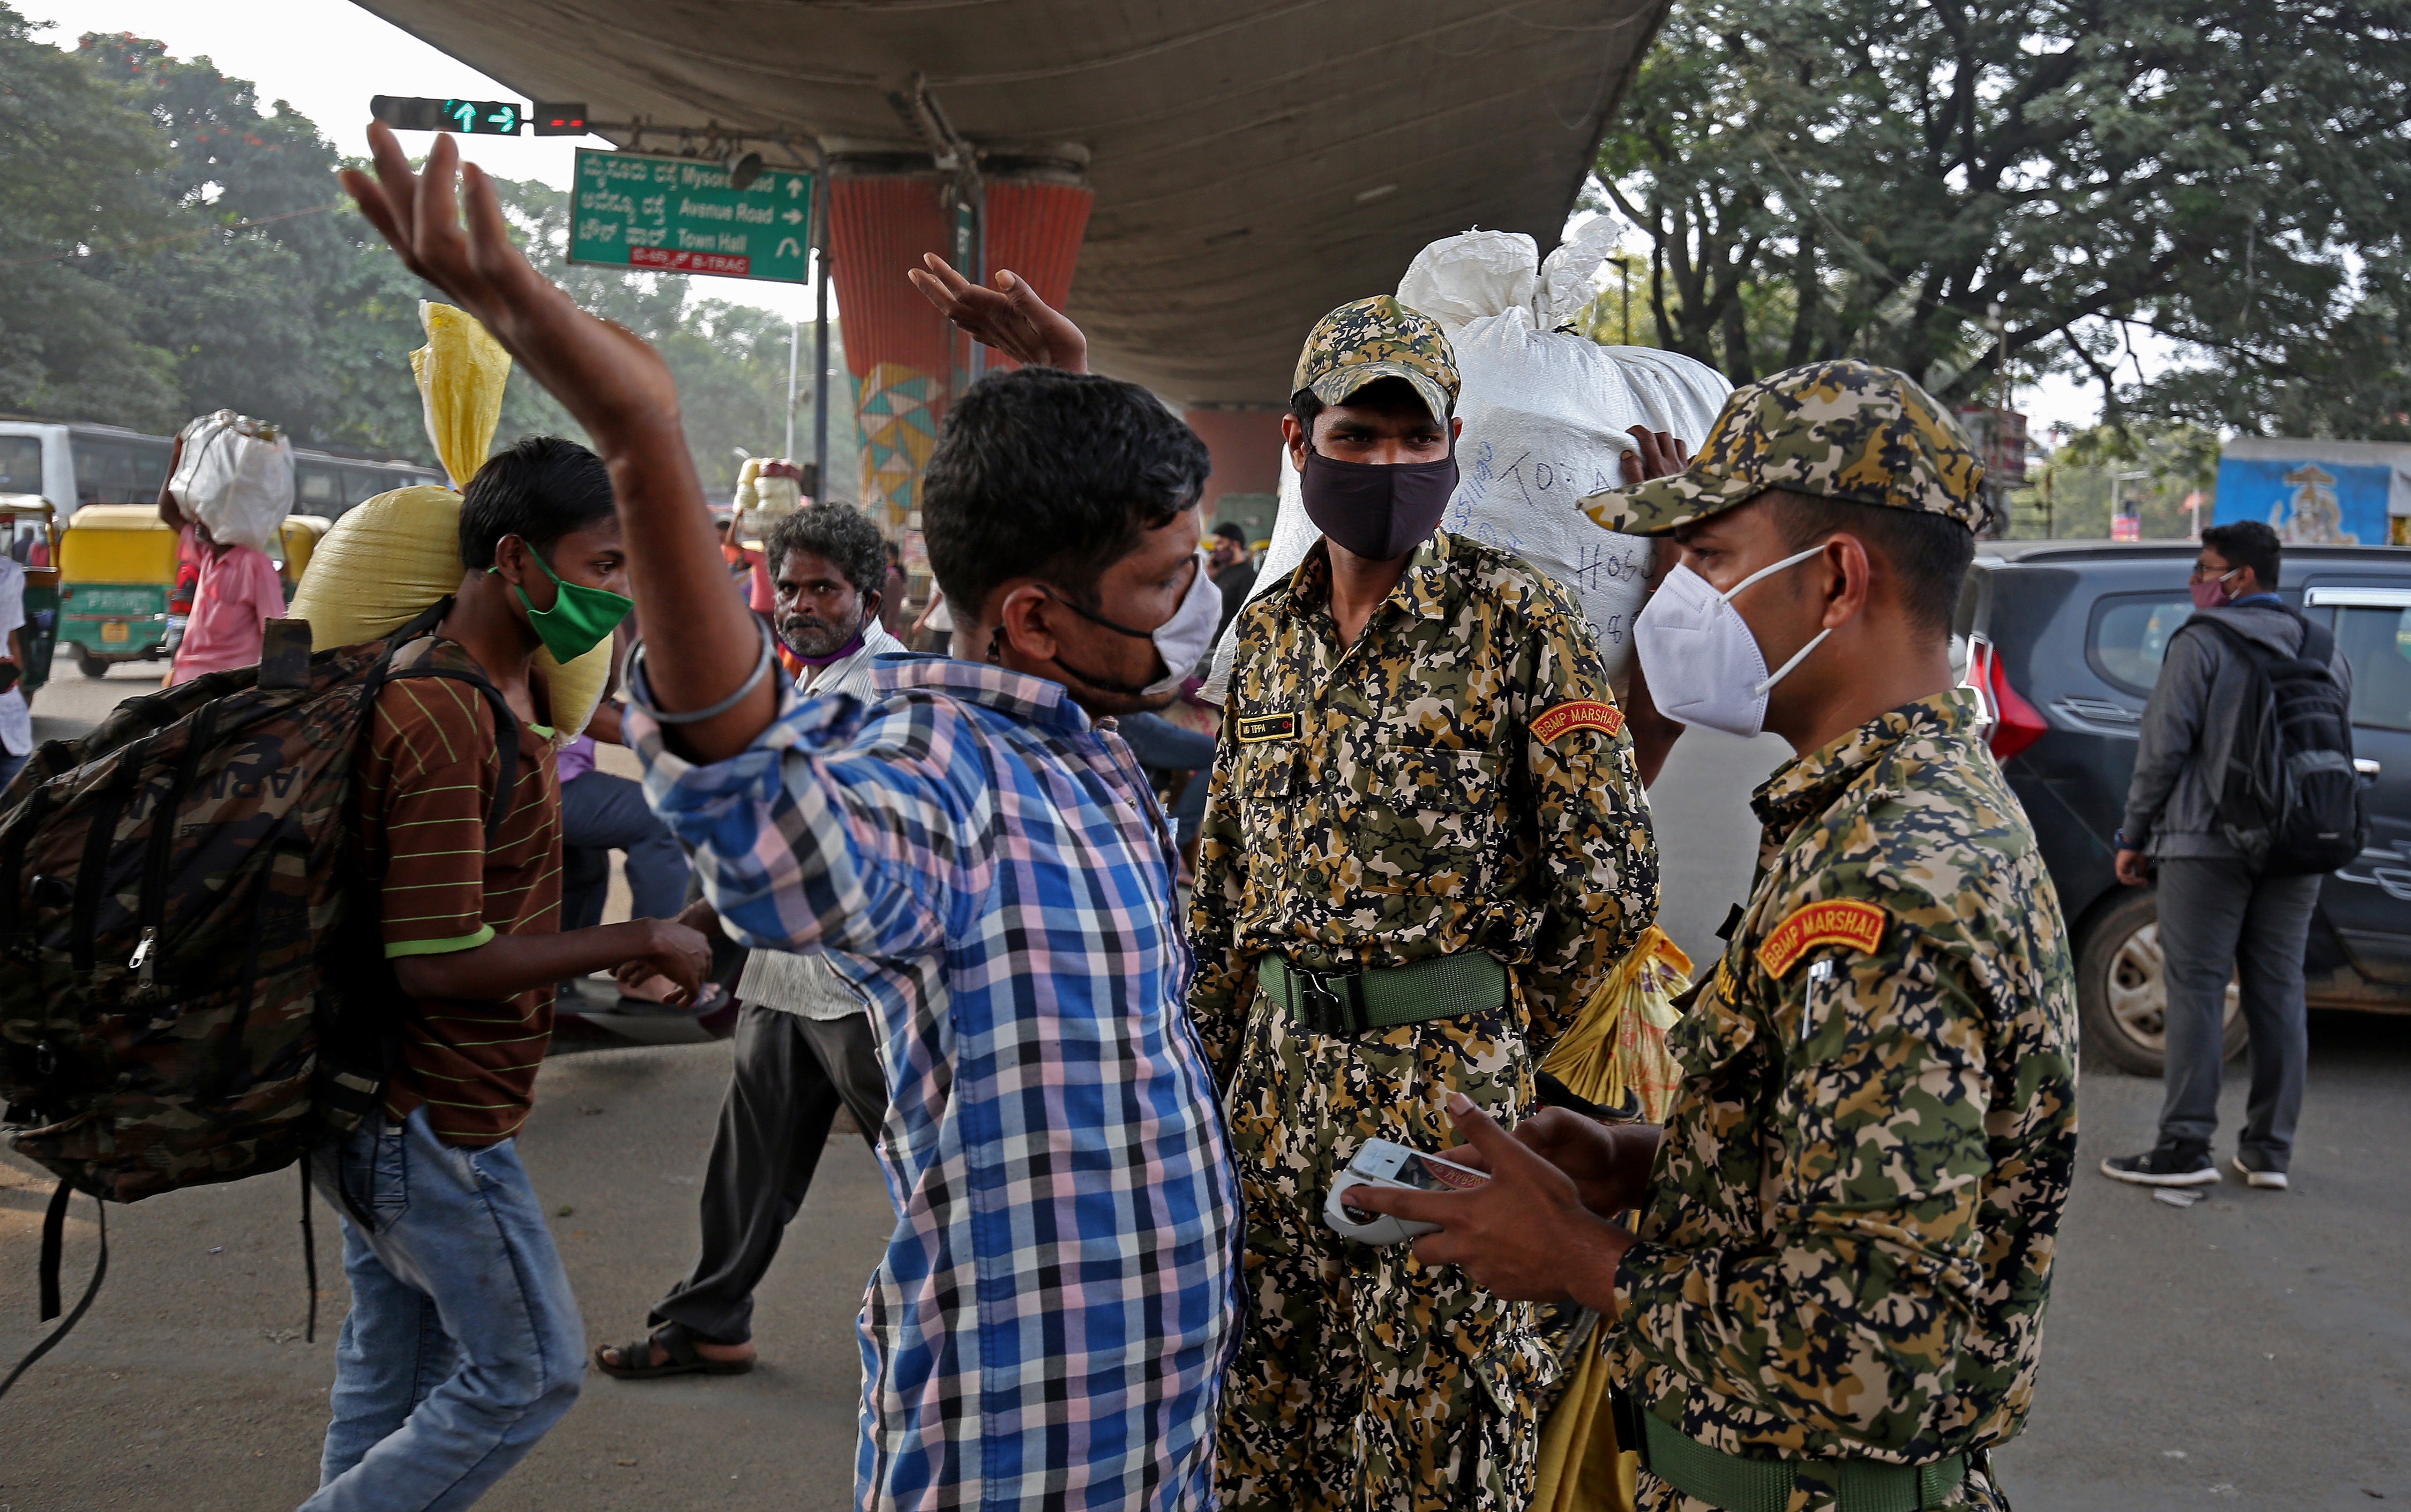 Marshals patrol the area looking for people not wearing a mask amid the ongoing pandemic in Karnataka state capital Bengaluru, where a case of the omicron variant was detected